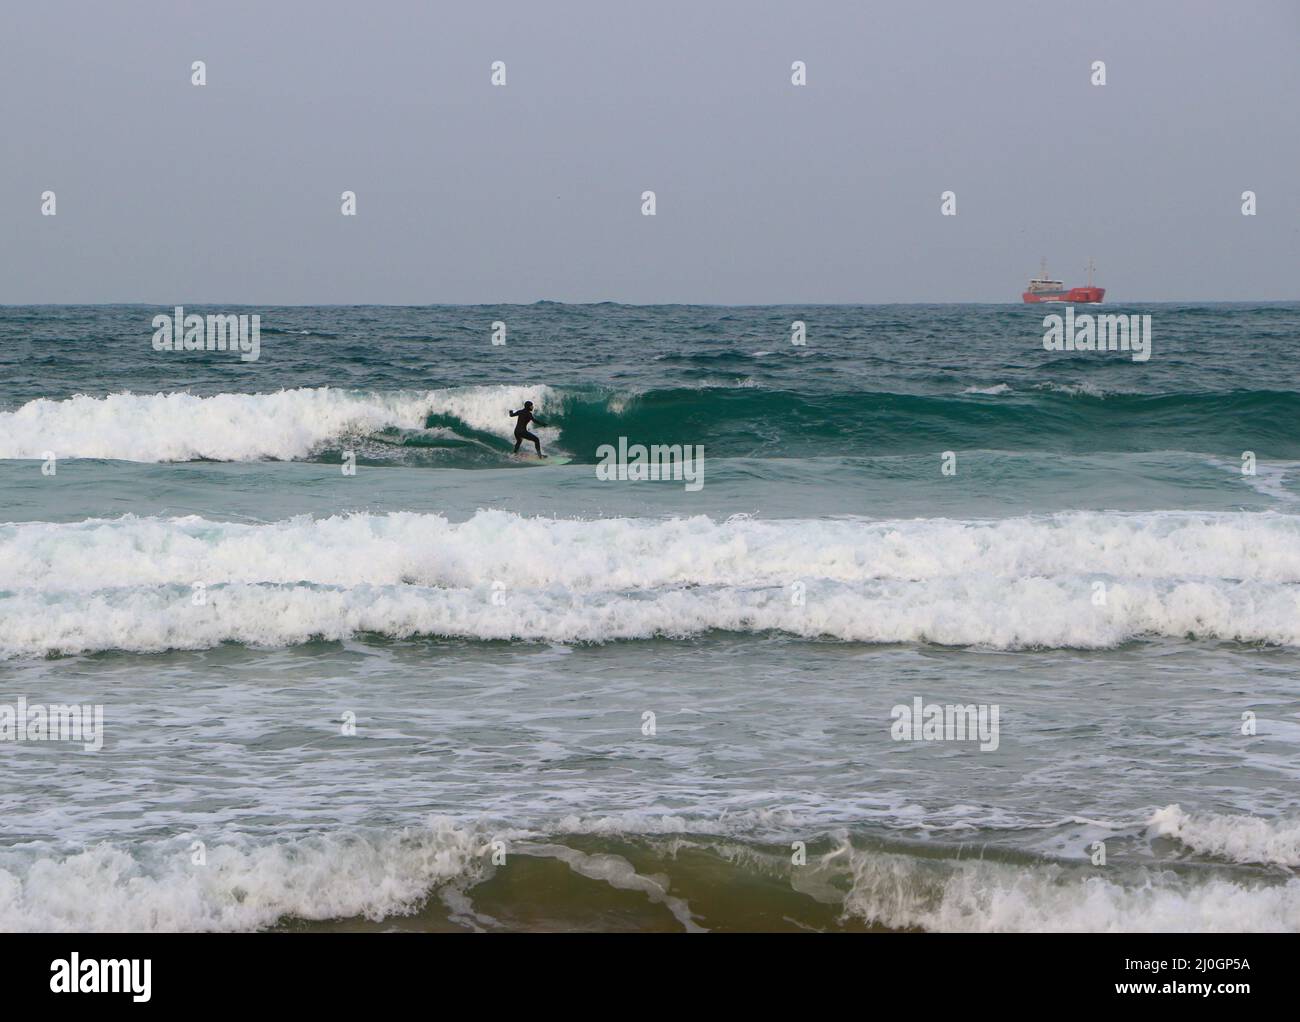 Lady Alexandra cargo ship manoeuvring to anchor off the beach with a surfer Sardinero Santander Cantabria Spain Stock Photo